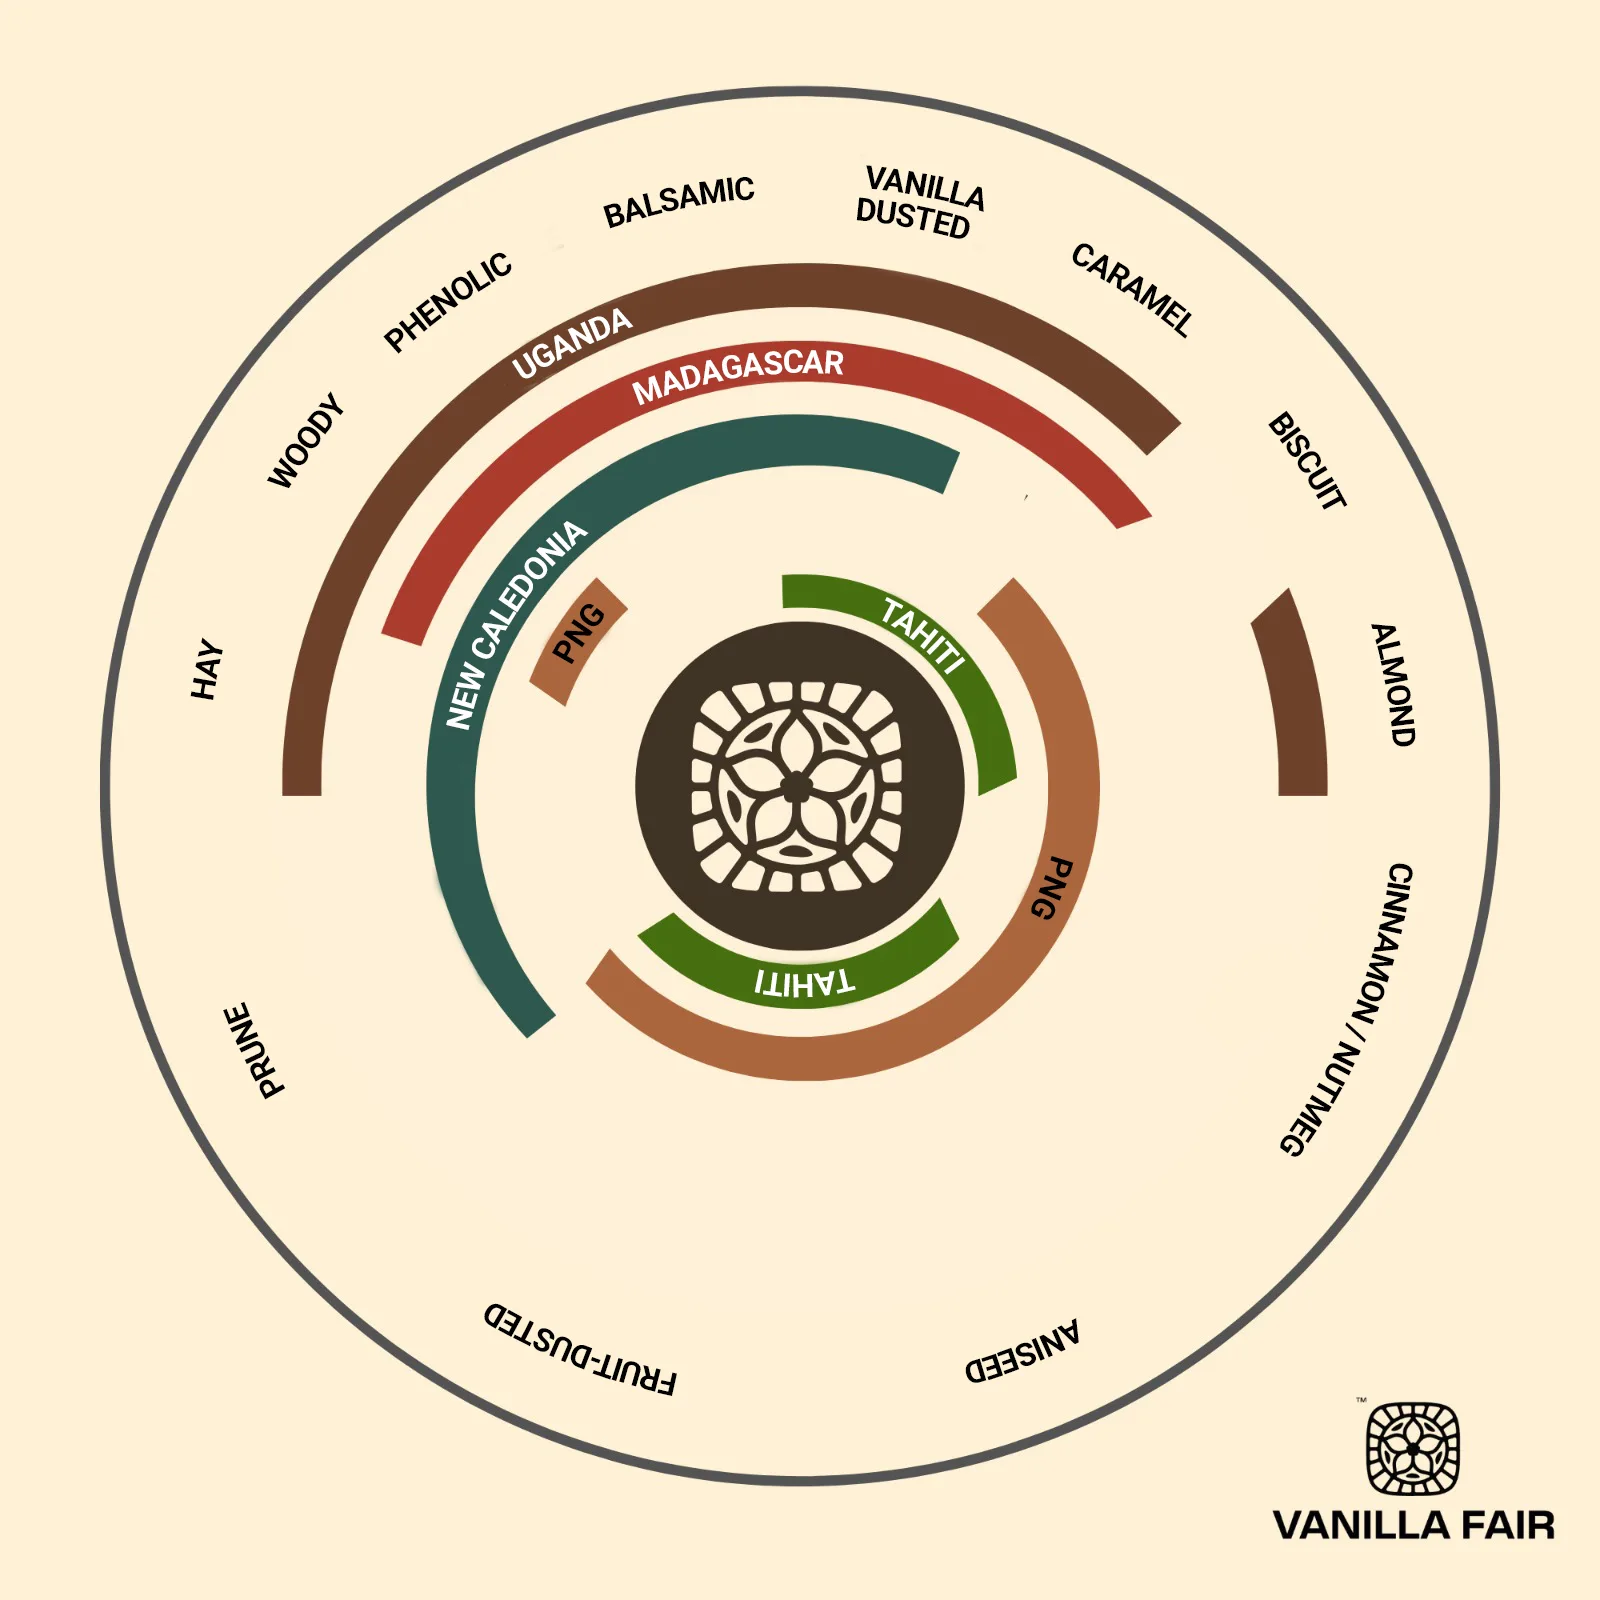 Infographic depicting the aromatic profiles of vanilla from different regions including Madagascar, Tahiti, PNG, and New Caledonia. Each region is represented by a colored segment in concentric circles around a central decorative motif, with aromatic descriptors like 'vanilla', 'caramel', and 'biscuit' for Madagascar. Vanilla Fair logo at the bottom